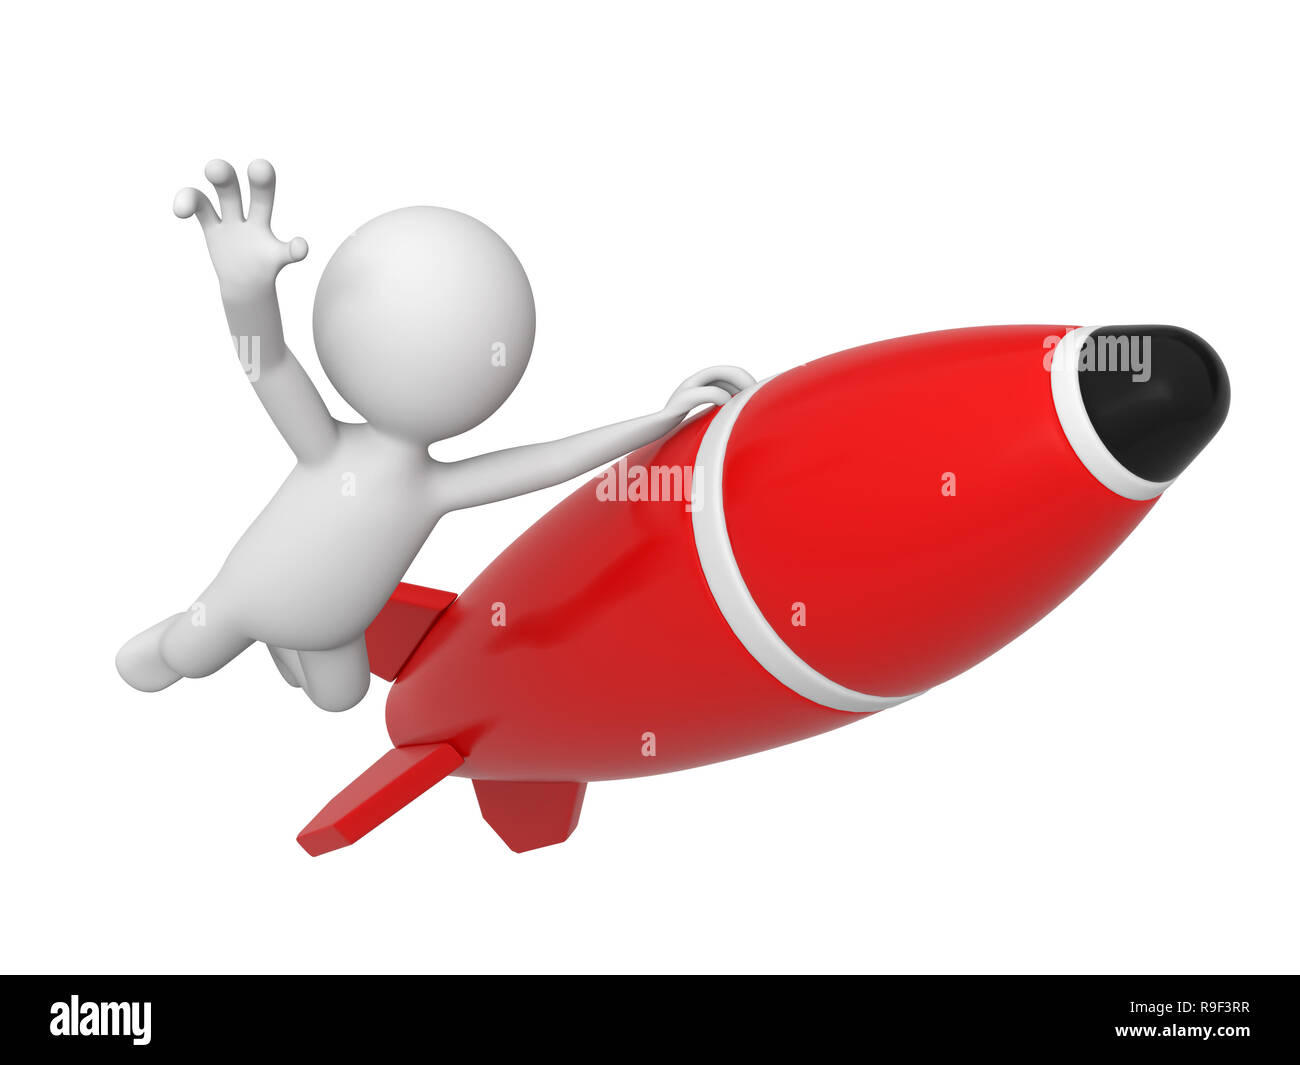 a man flying together with a bomb Stock Photo